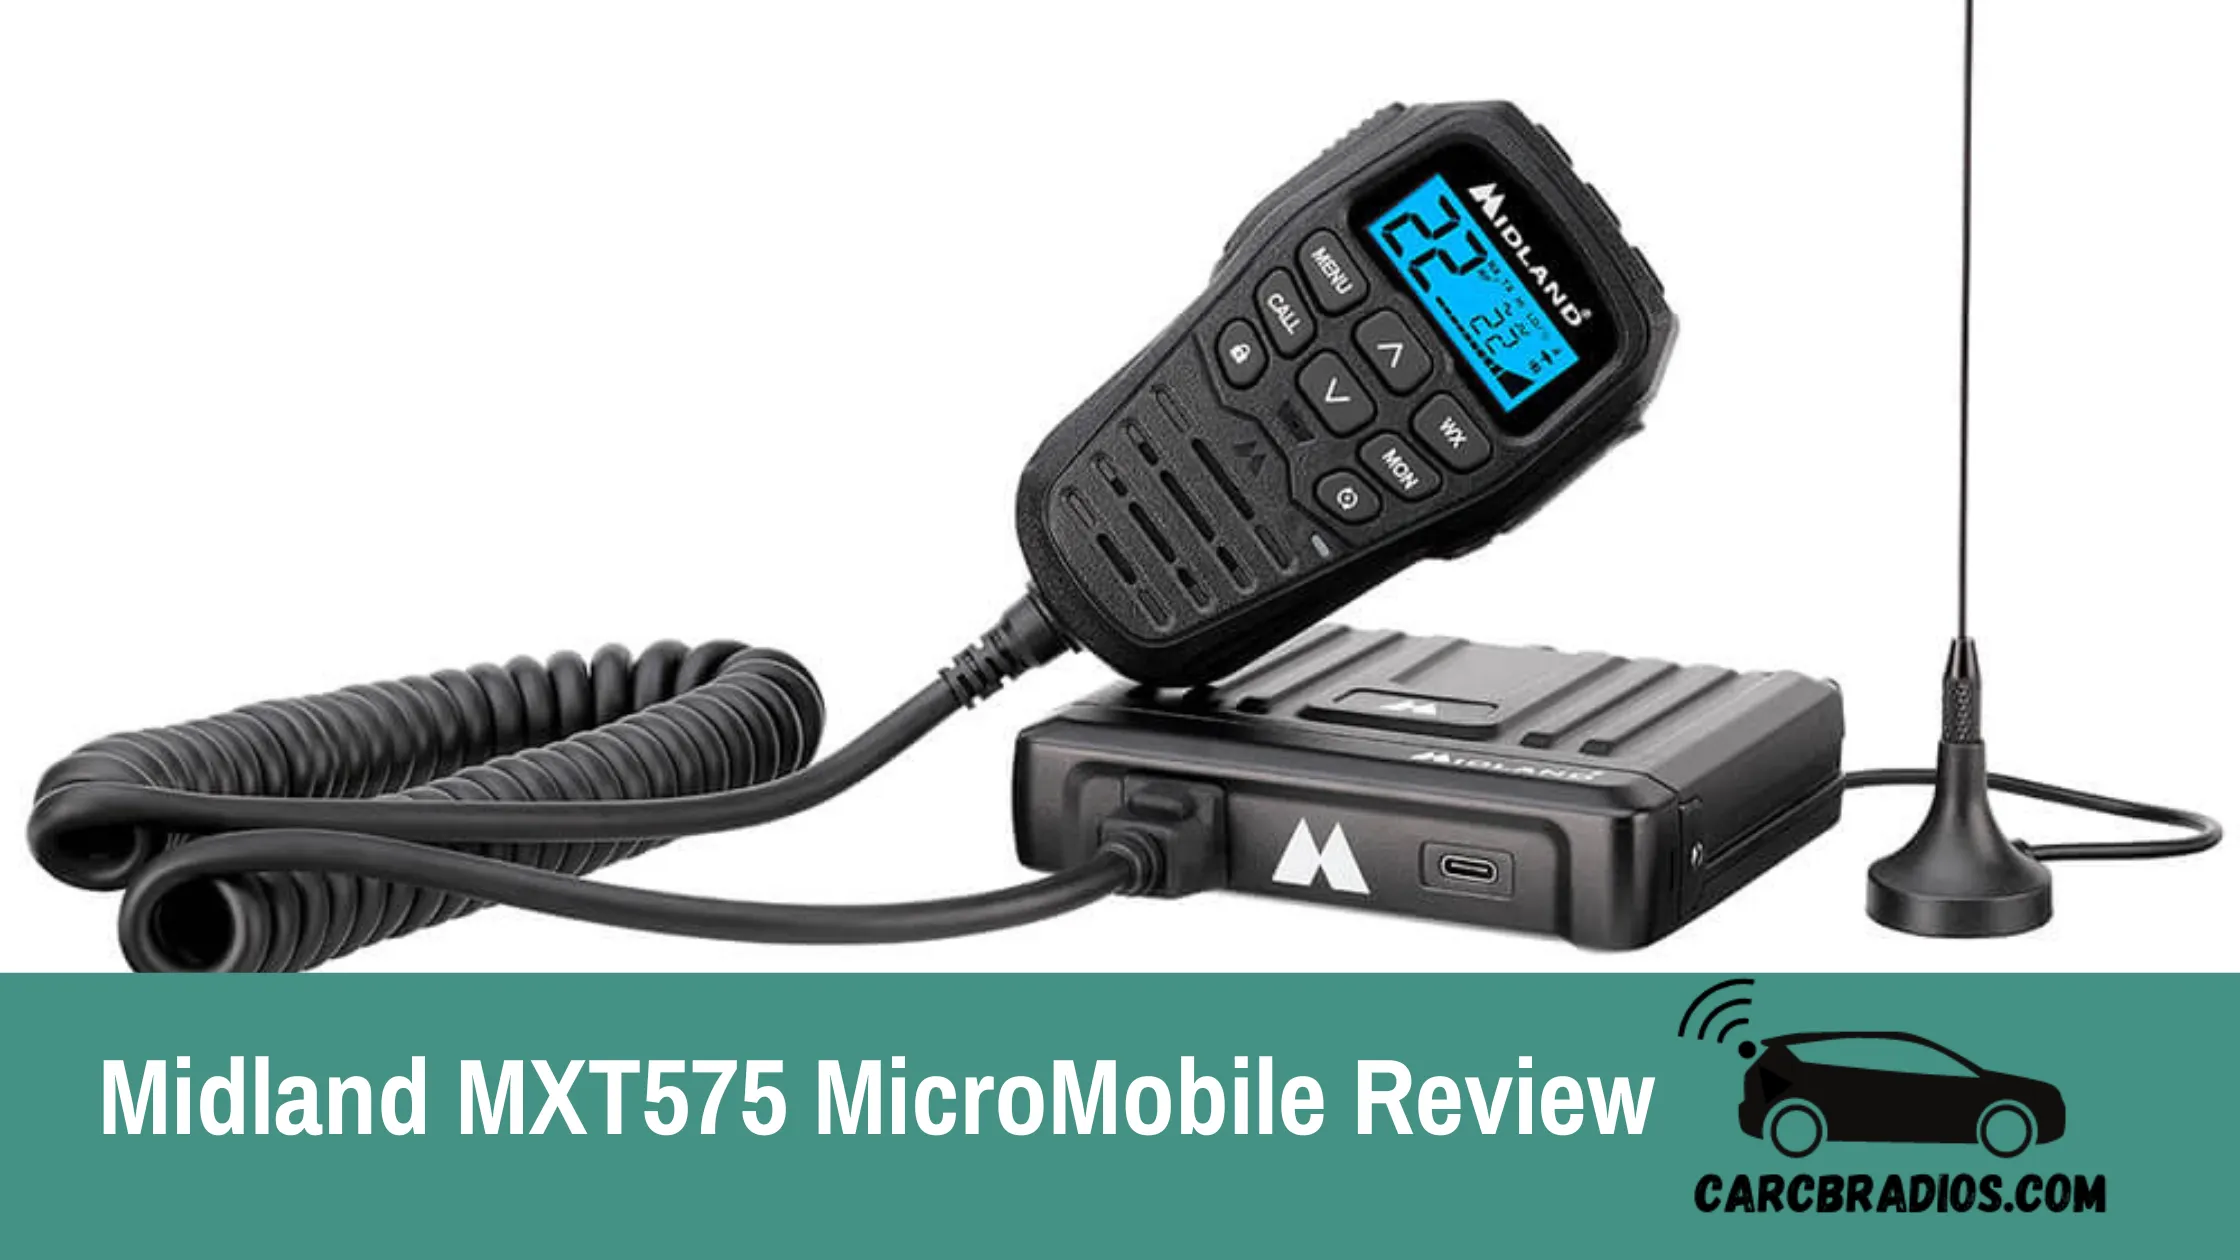 Midland MXT575 MicroMobile Review: 